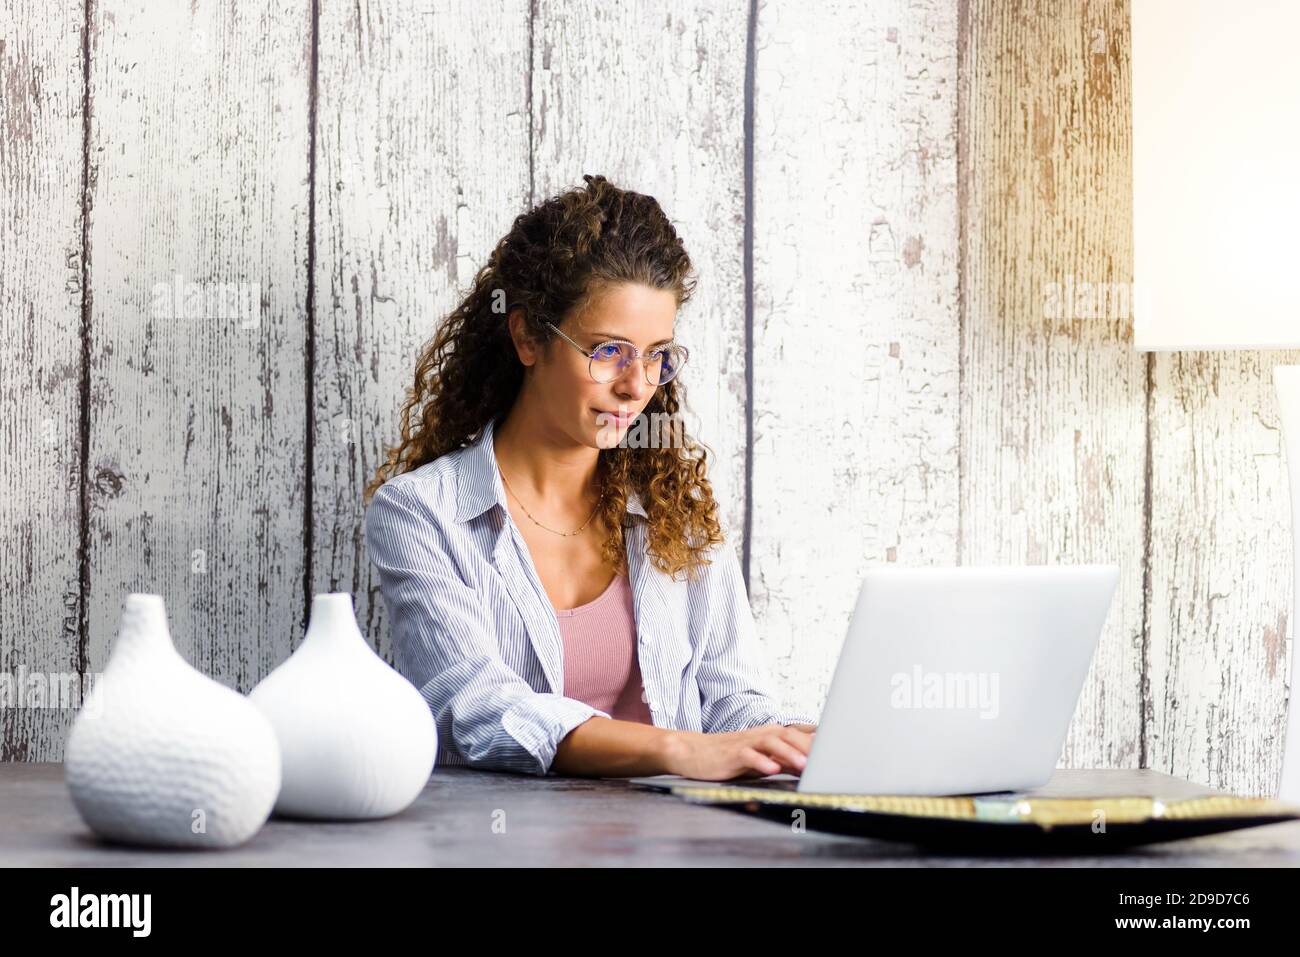 Young lady wearing glasses sitting at a dining table remote working on a laptop from home during the lockdown for the Covid-19 pandemic Stock Photo